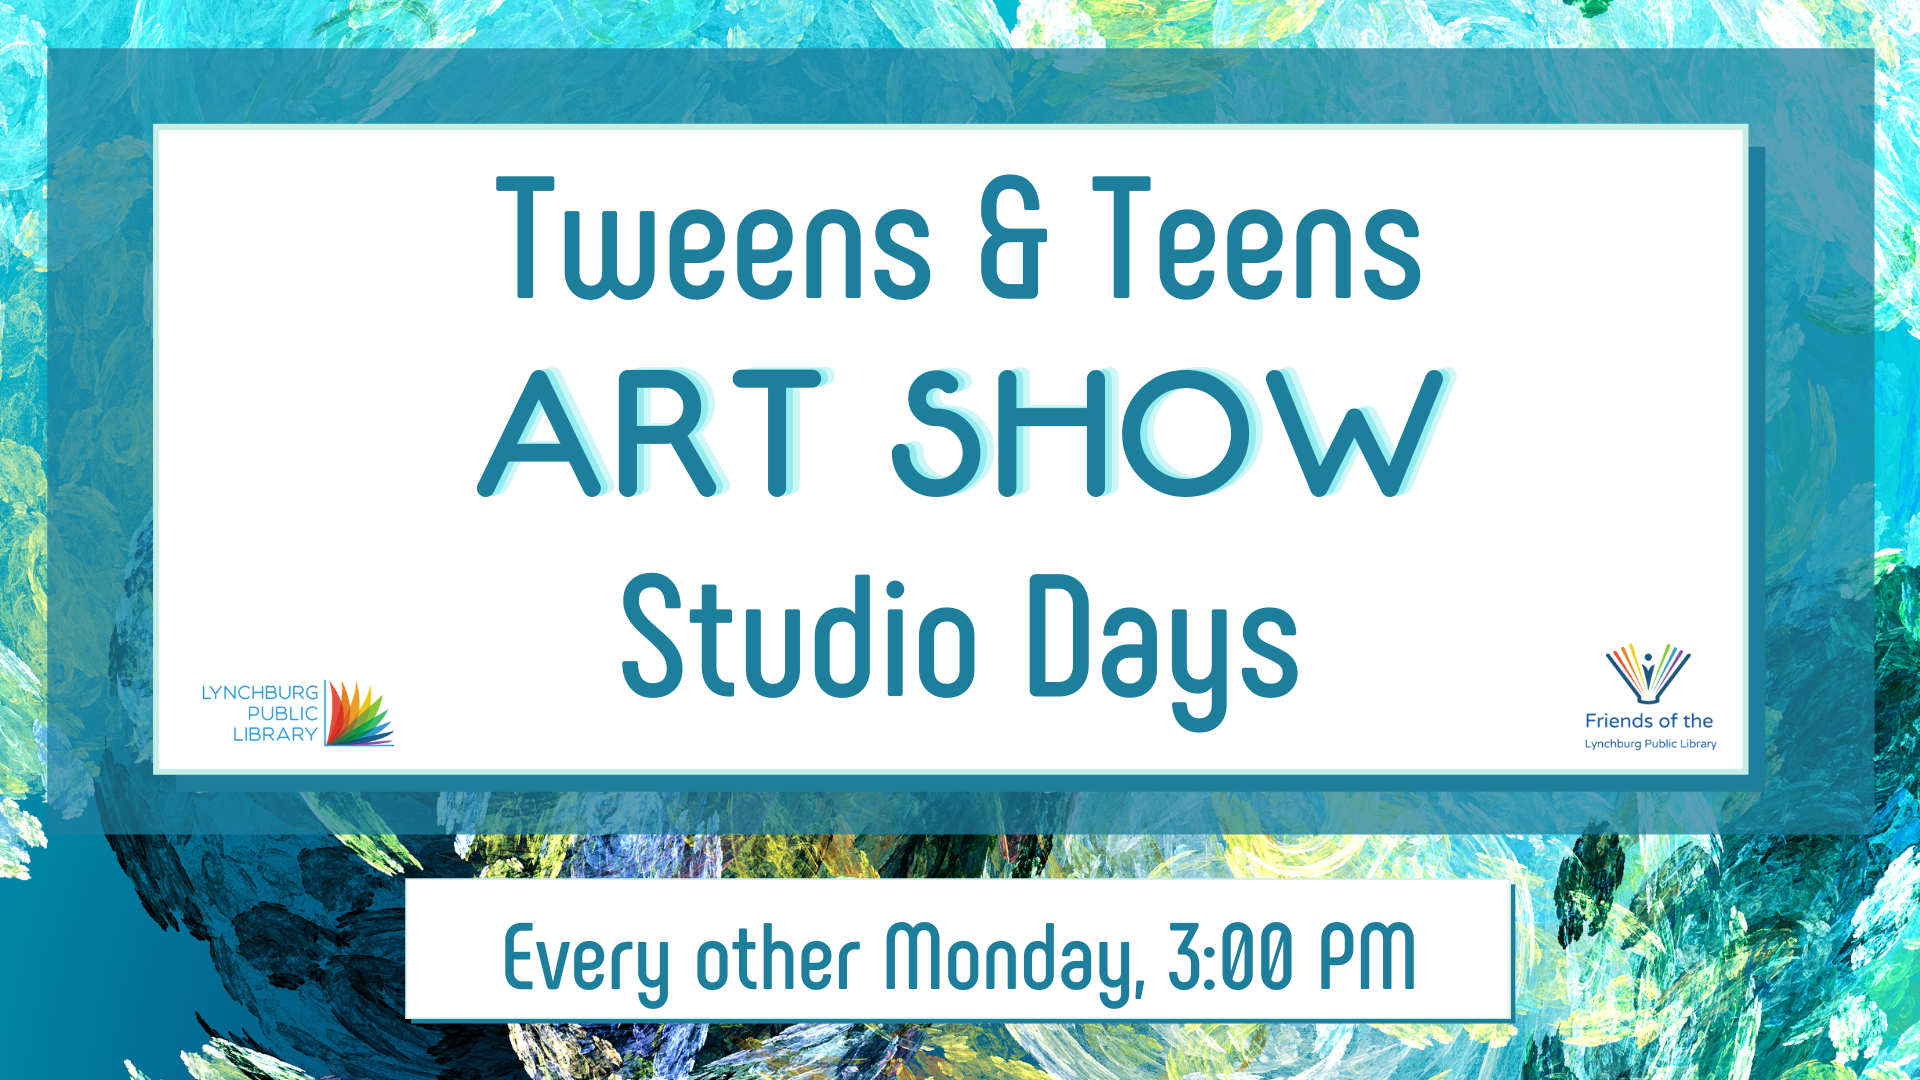 Image features paint splattered background. Text states Tweens & Teens Art Show Studio Days Every other Monday 3:00 PM